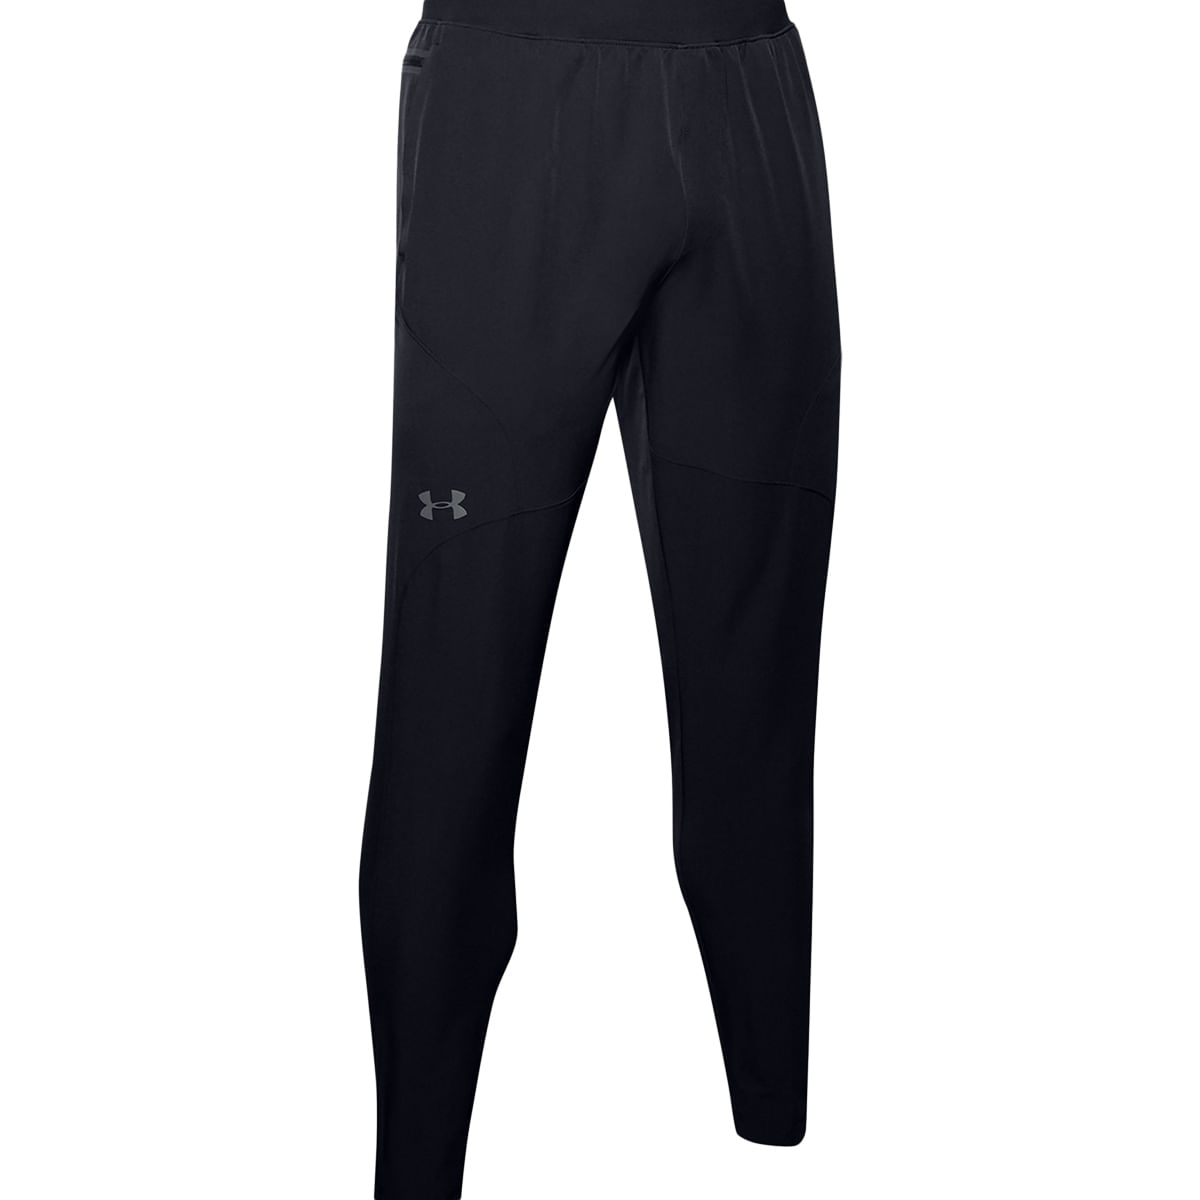 Under Armour BOYS ATHLETIC PANTS GRAPHITE or BLACK SIZE 4 /5/6/7